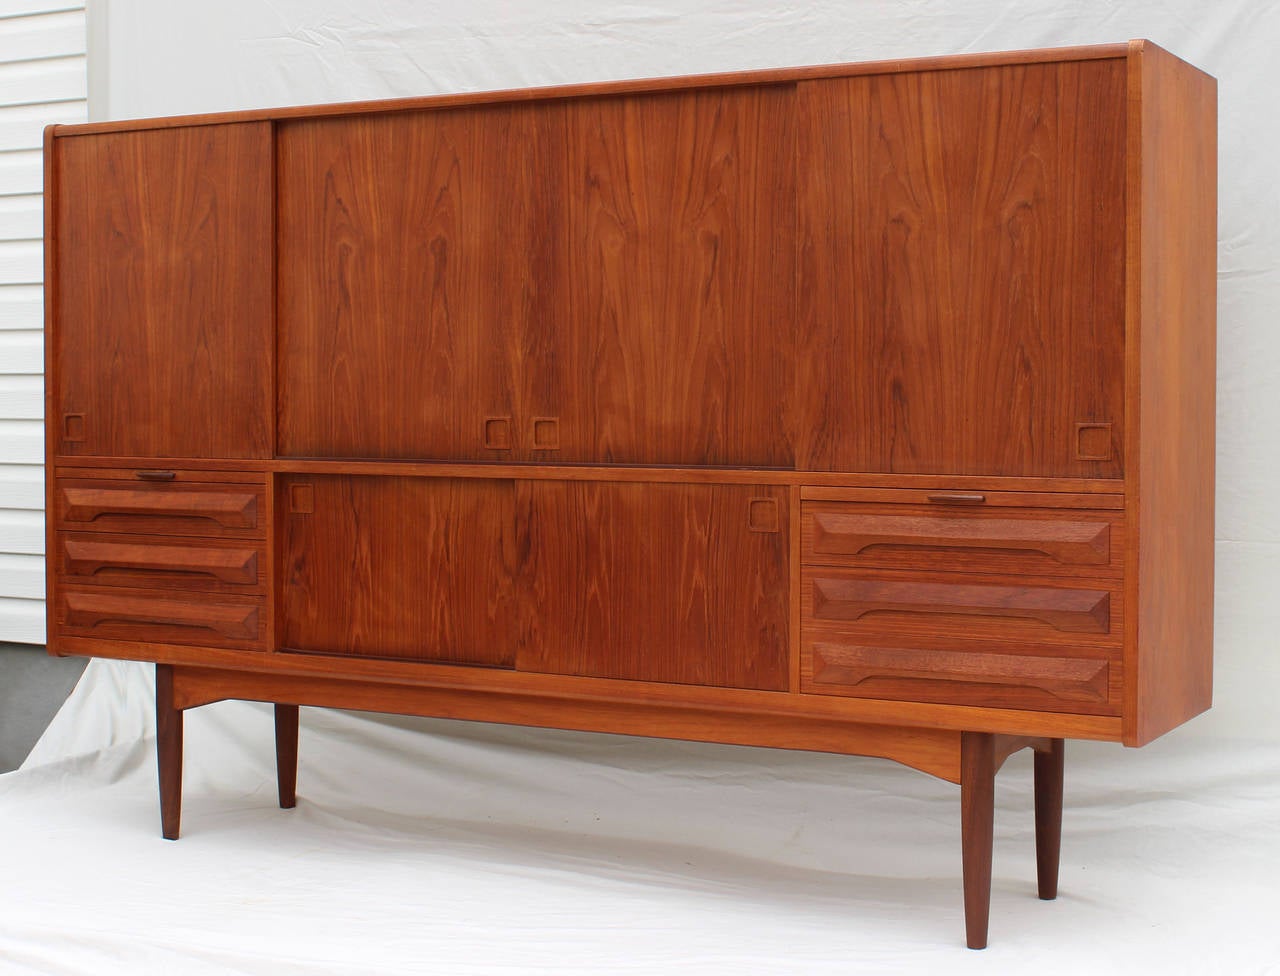 A handsome teak cabinet sideboard with various interior spaces for efficient storage and display.